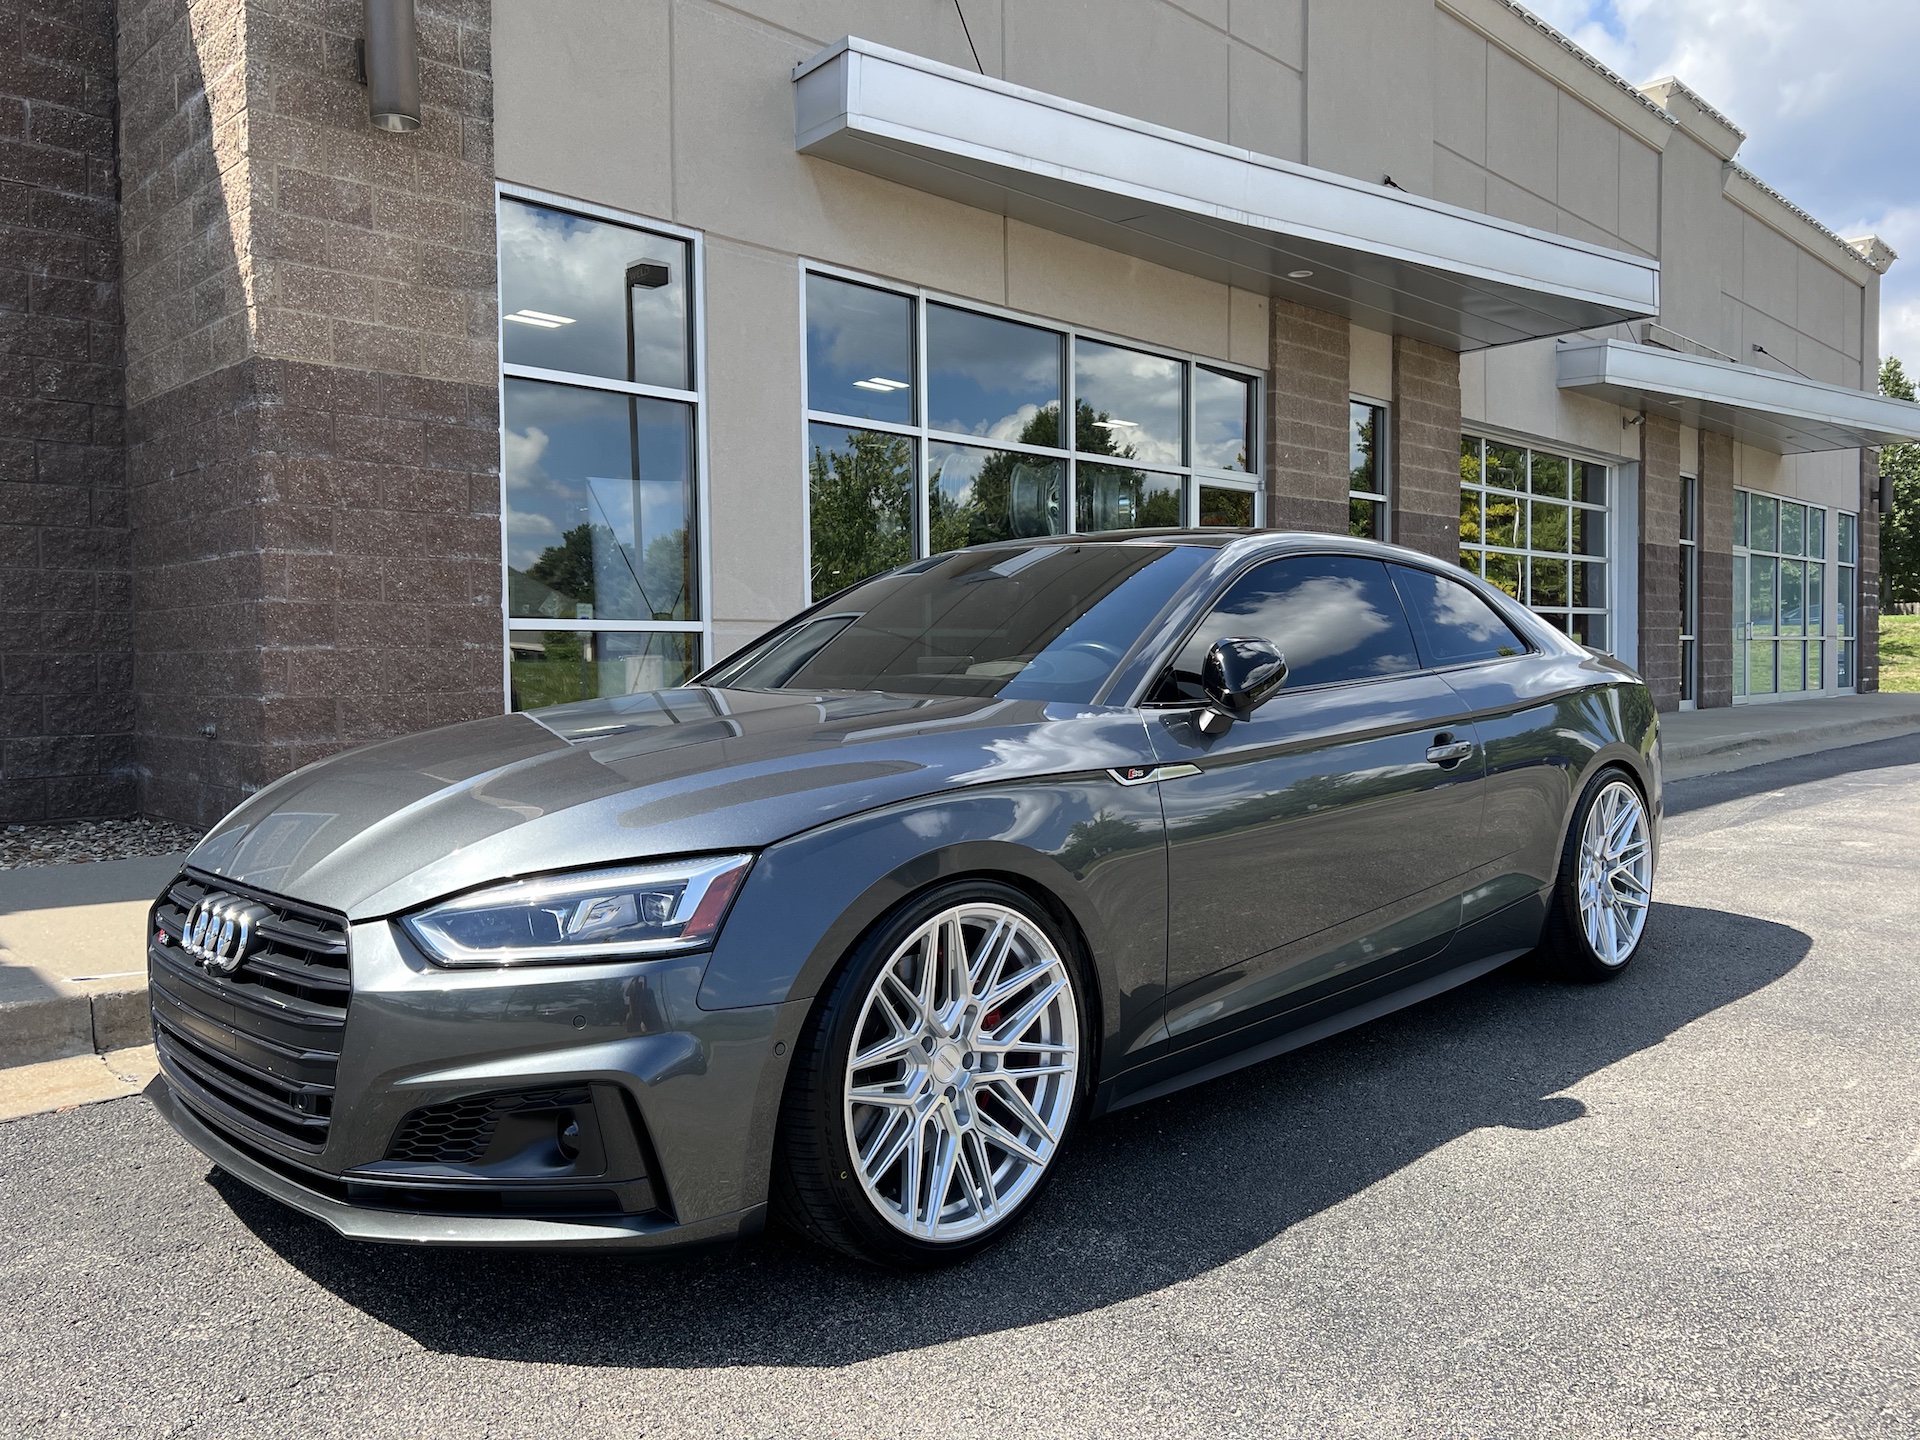  Audi S5 with 